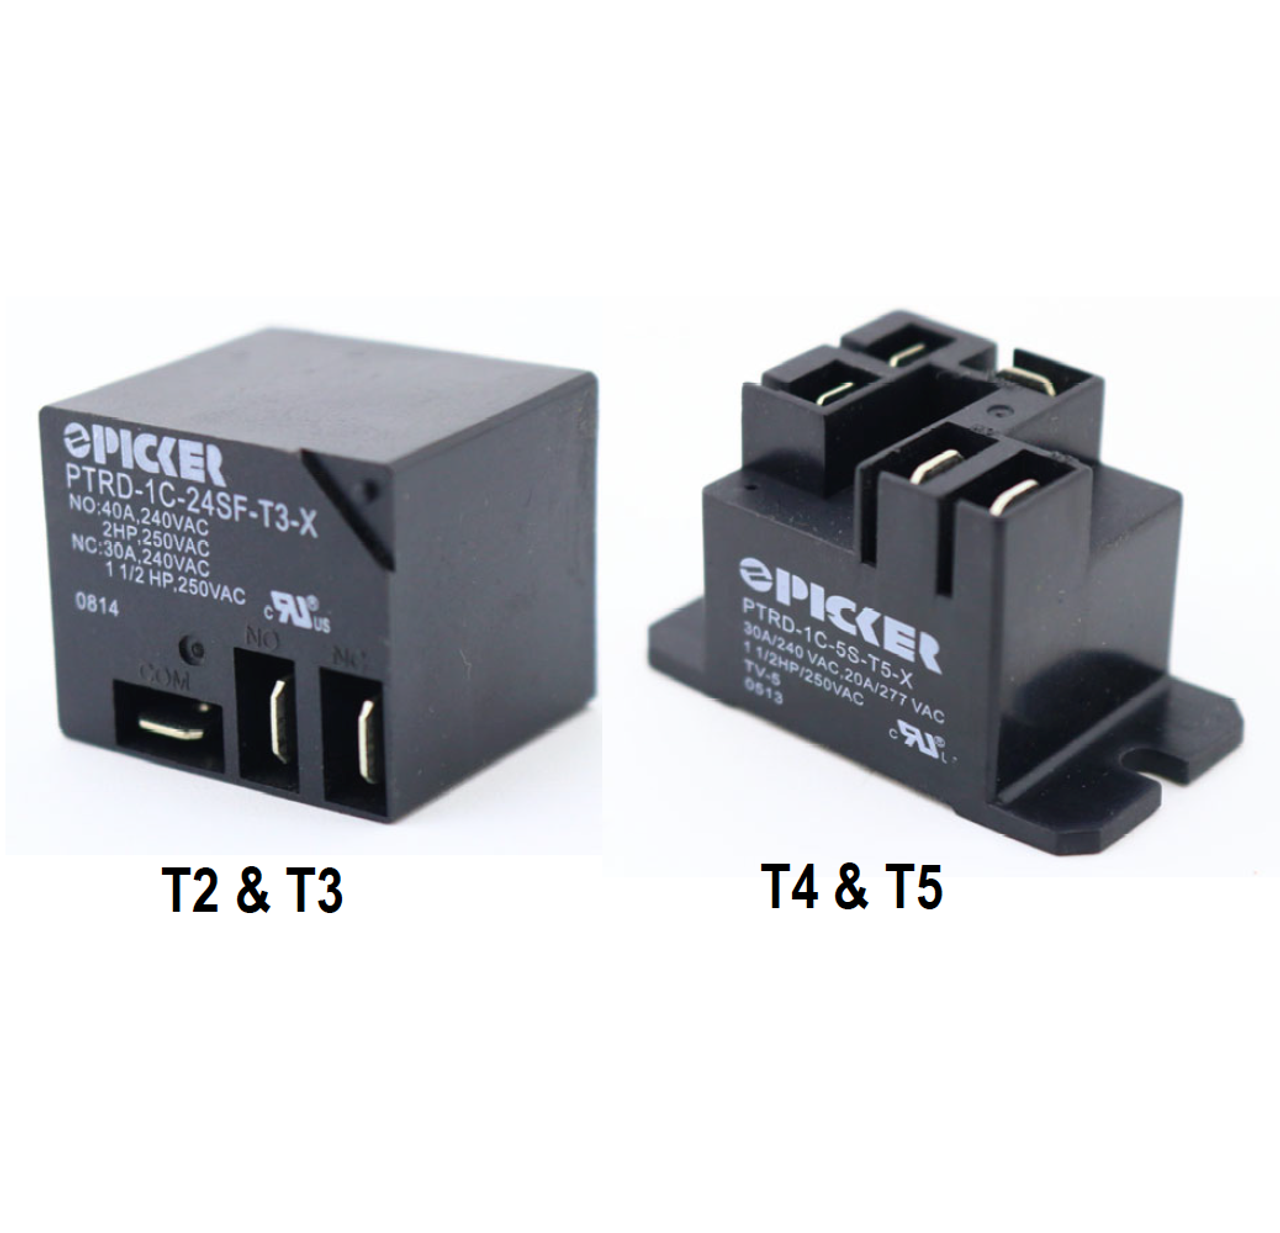 Picker PTRD-1A-6S-T5-X Power Relays